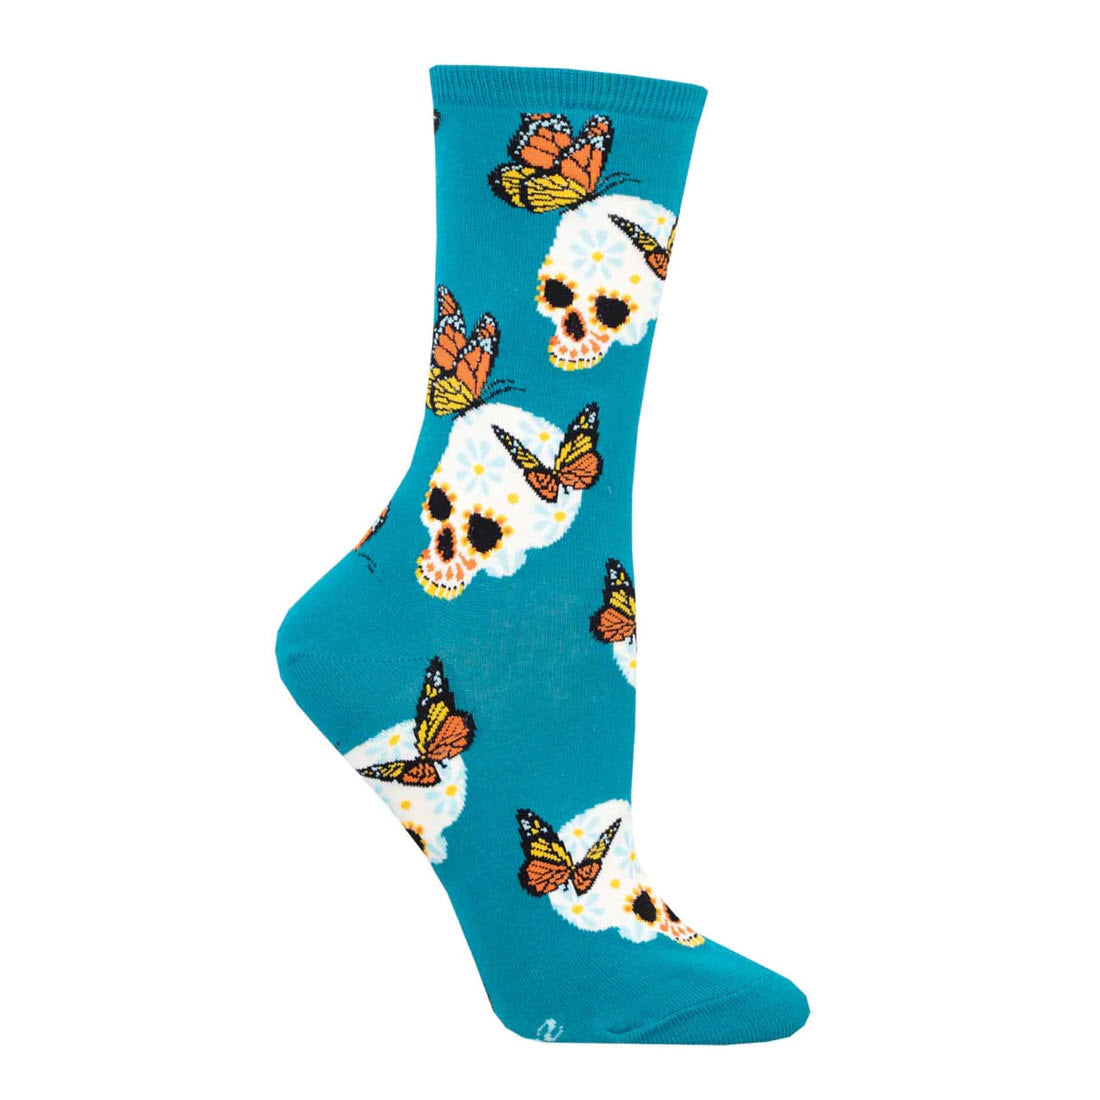 A single SOCKSMITH METAMORPHOSIS CREW SOCK in teal featuring a pattern of orange butterflies and white skulls, perfect for those who embrace change.